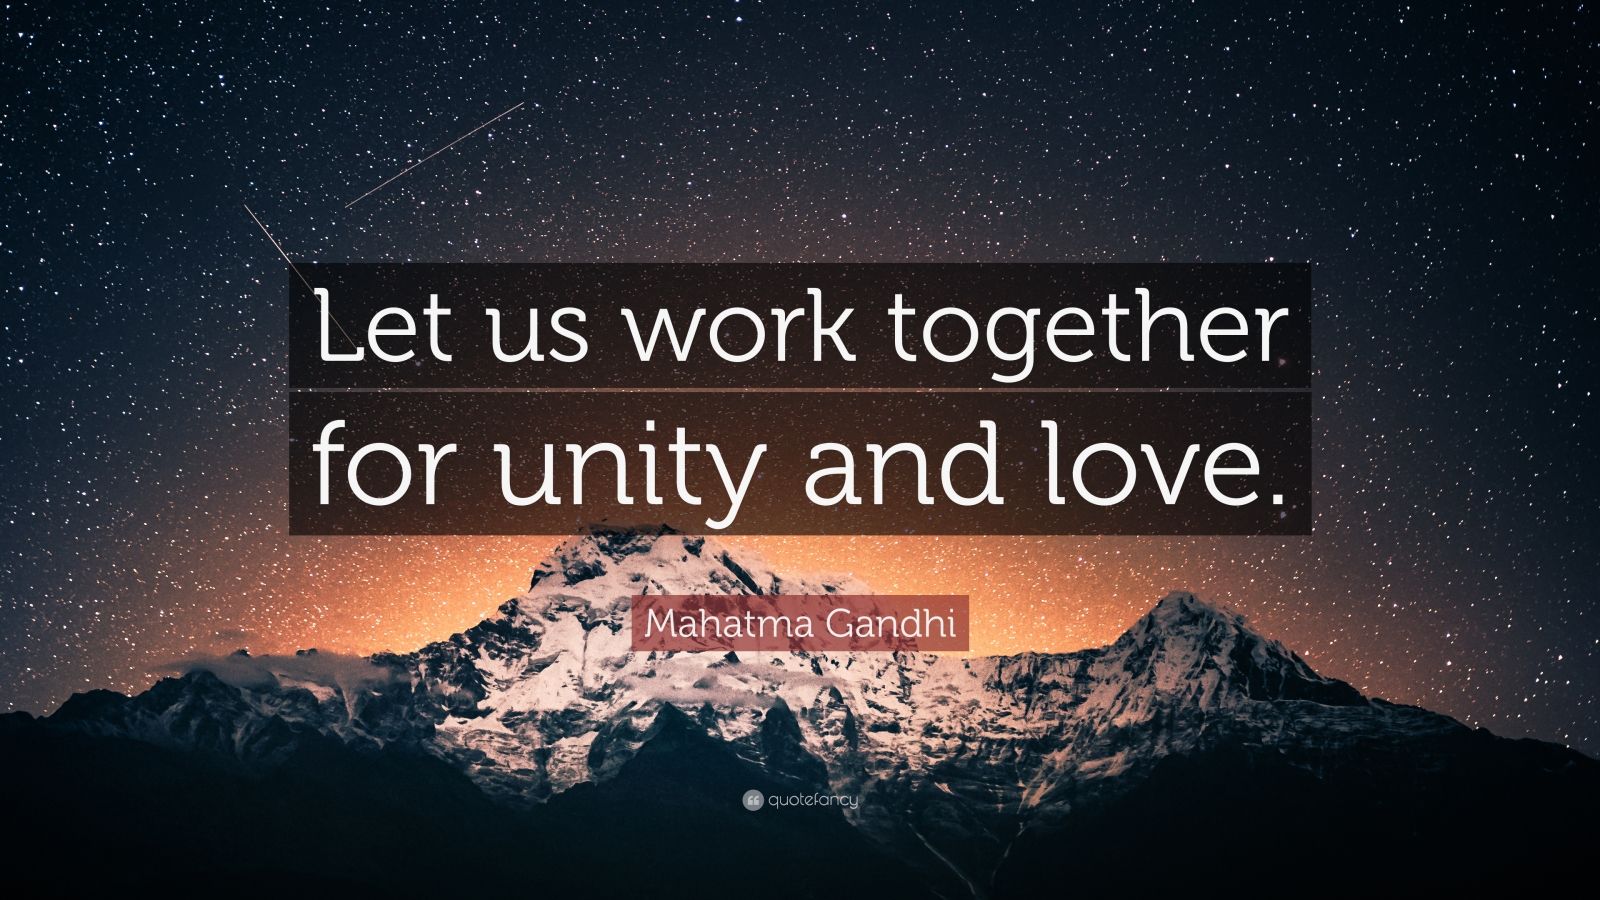 Mahatma Gandhi Quote “Let us work together for unity and